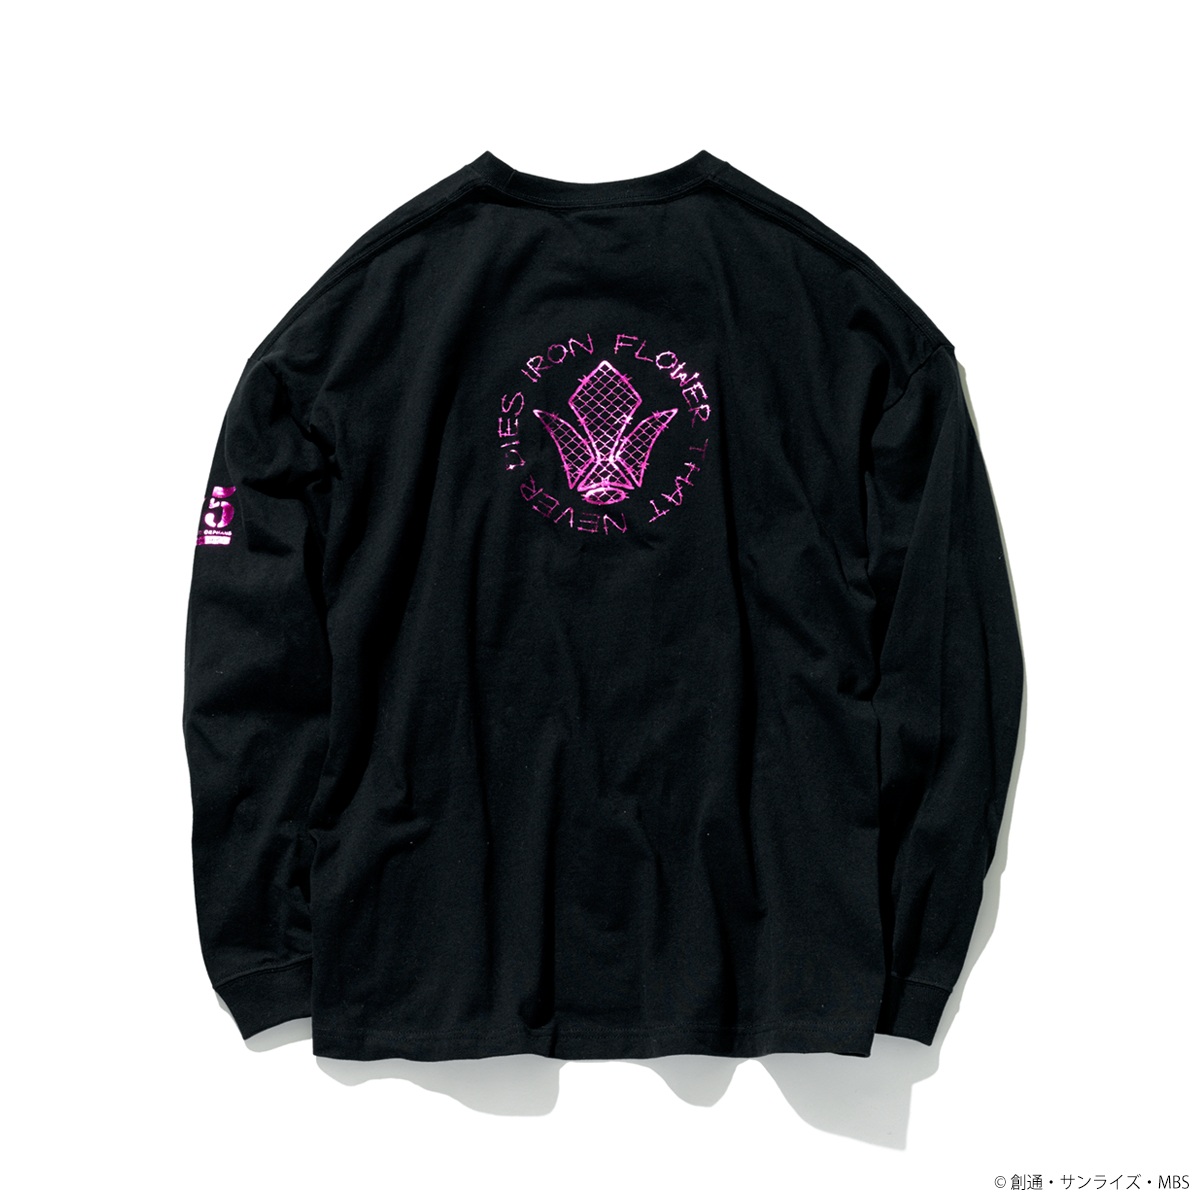 Ryusei-Go Long-Sleeve T-shirt—Mobile Suit Gundam IRON-BLOODED ORPHANS/STRICT-G Collaboration